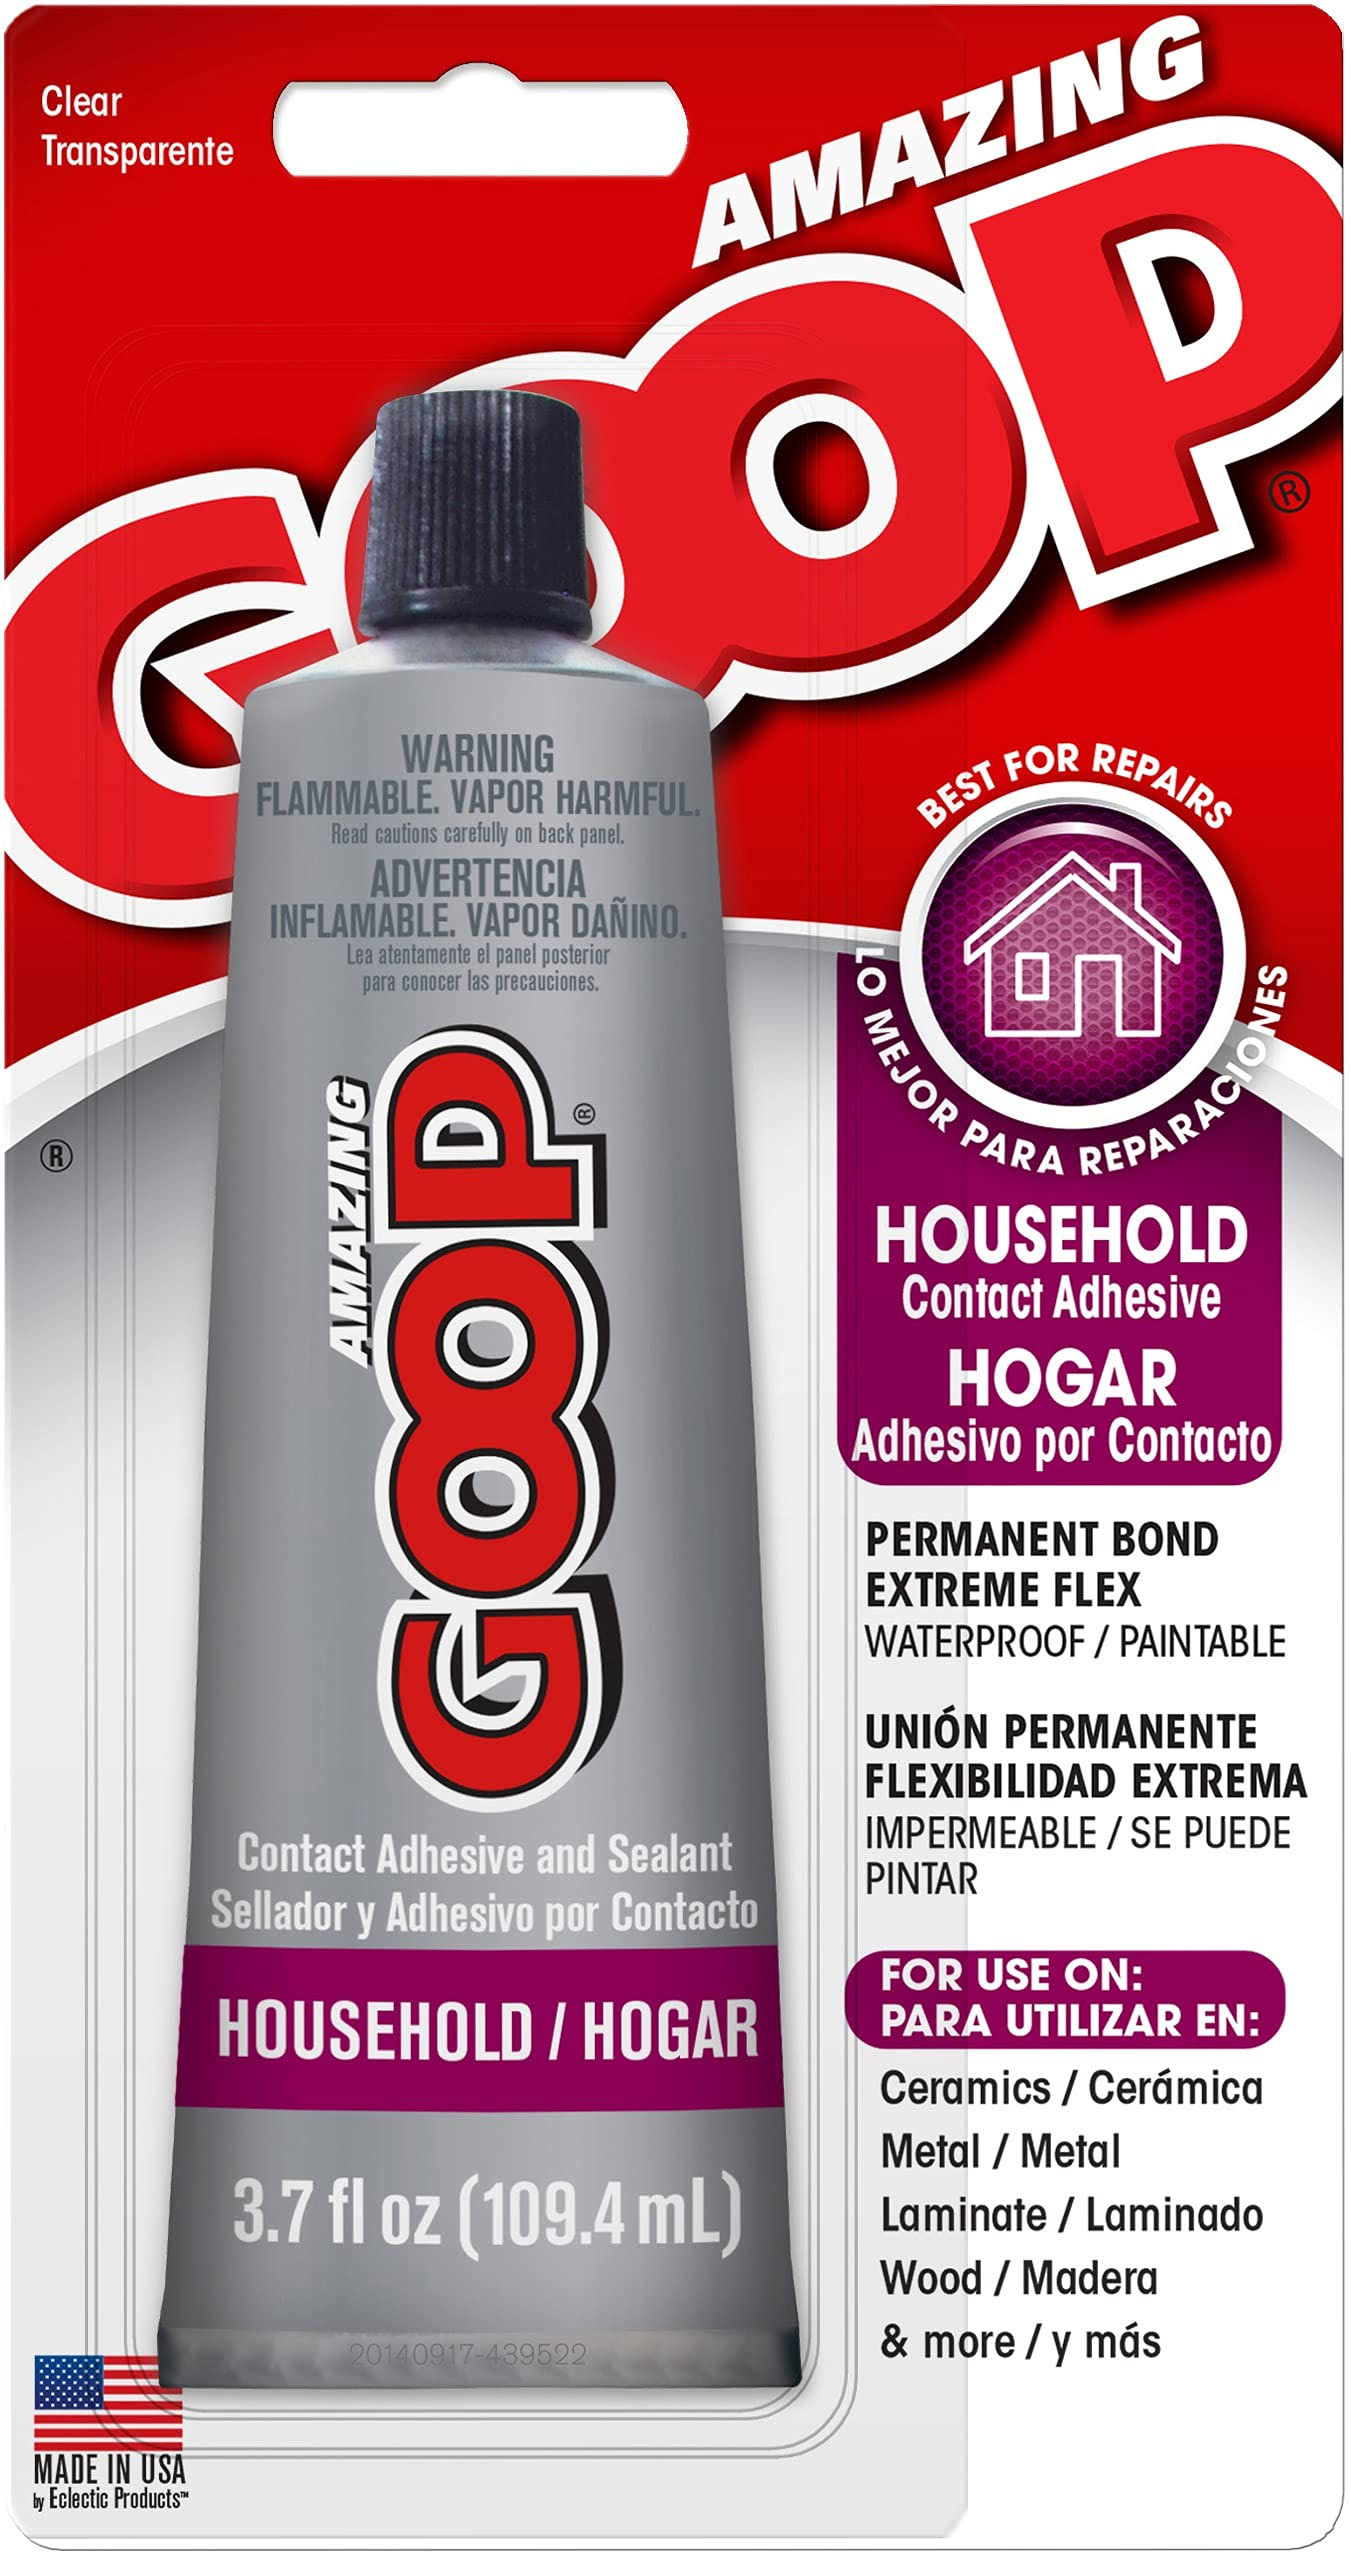 Amazing Goop Household Contact Adhesive and Sealant - 3.7oz